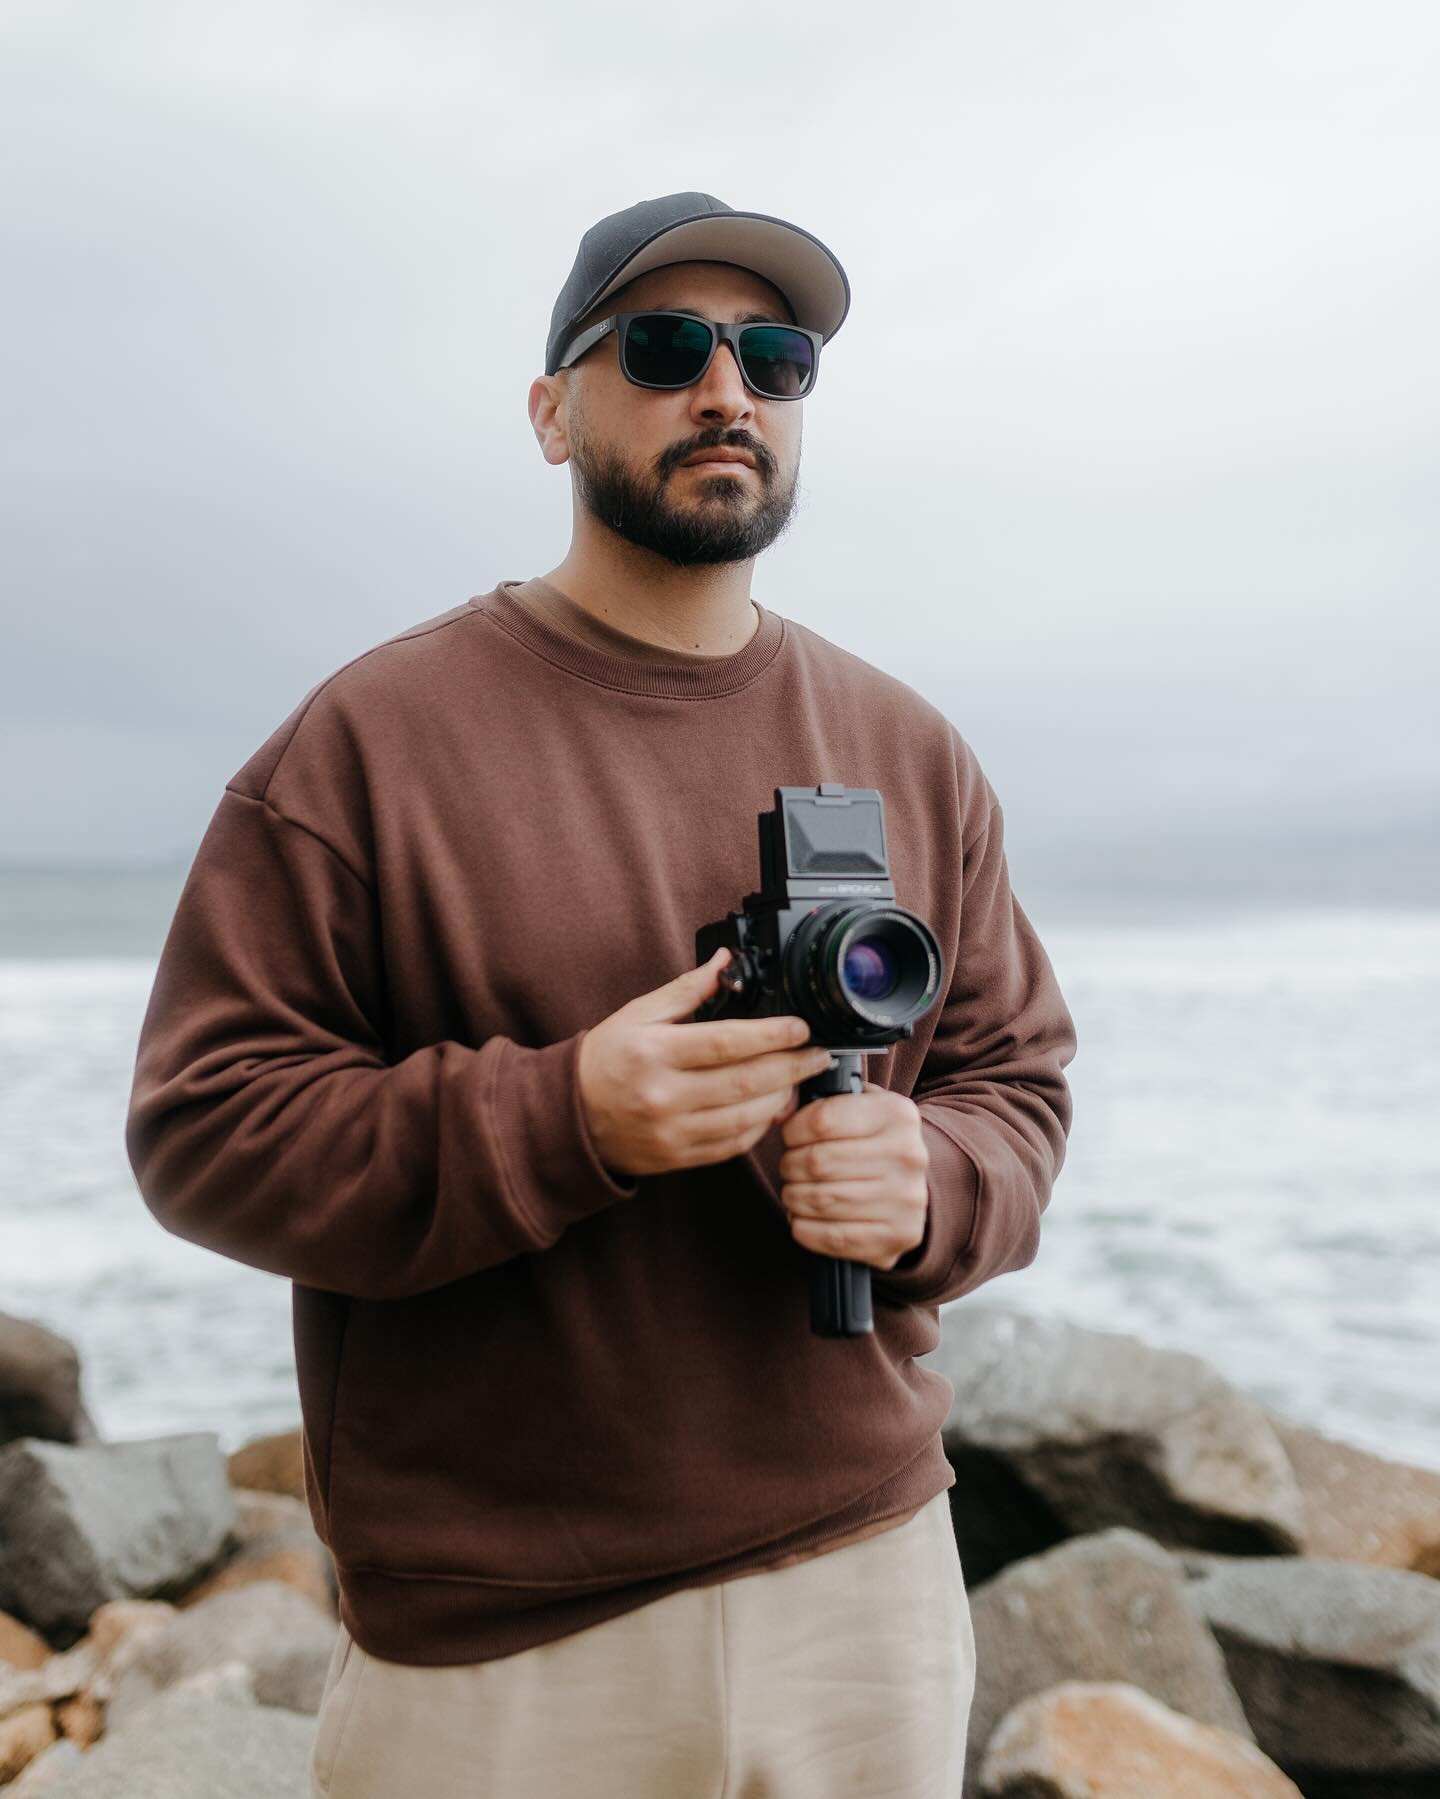 A little film action today at Morro Bay. 

#bronicaetrs #portra400 #canonshooter